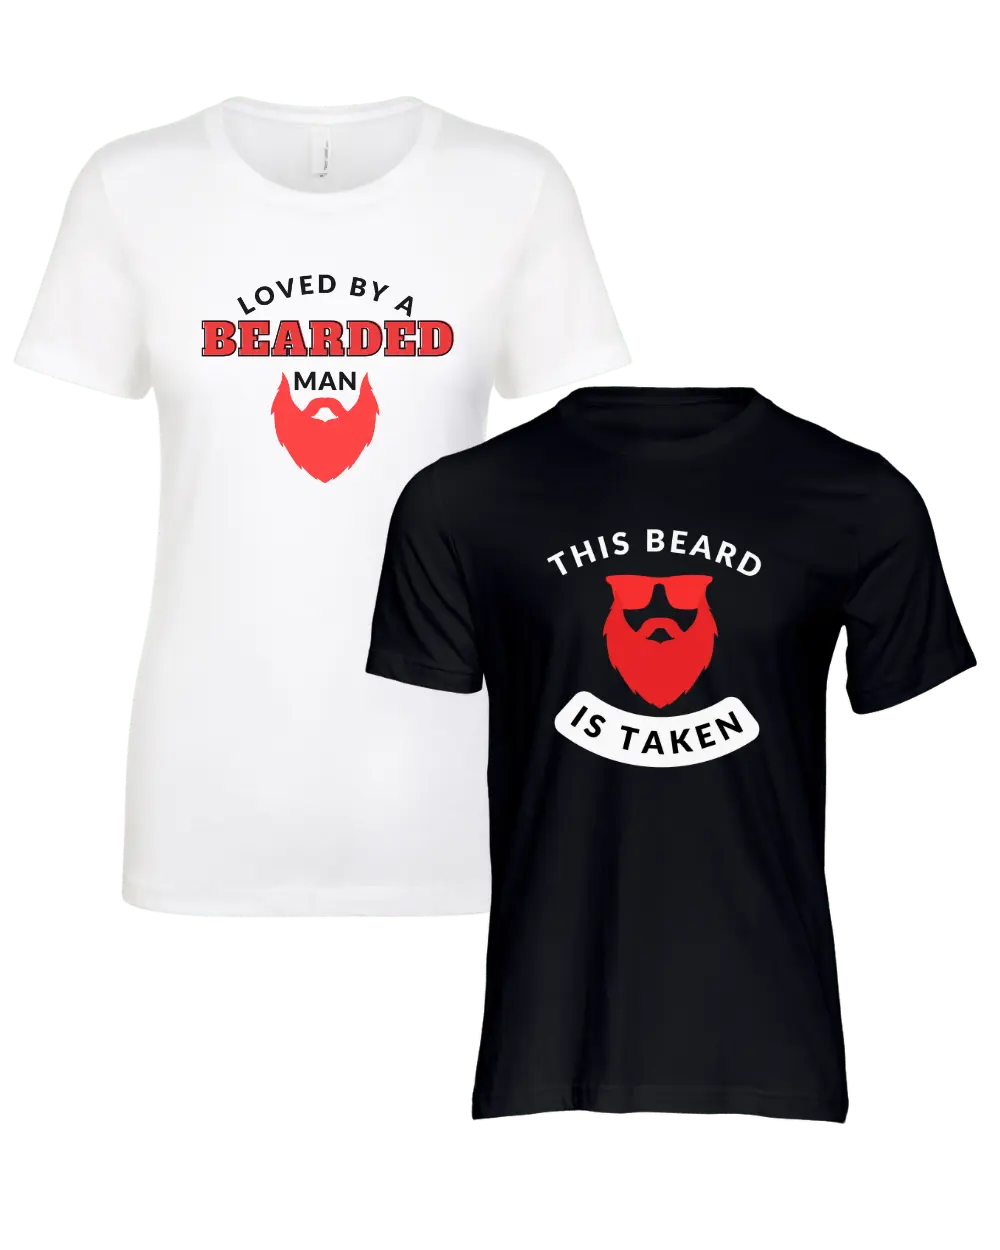 Loved By A Bearded Man/This Beard is Taken Couple T-Shirt|Couple T-shirt